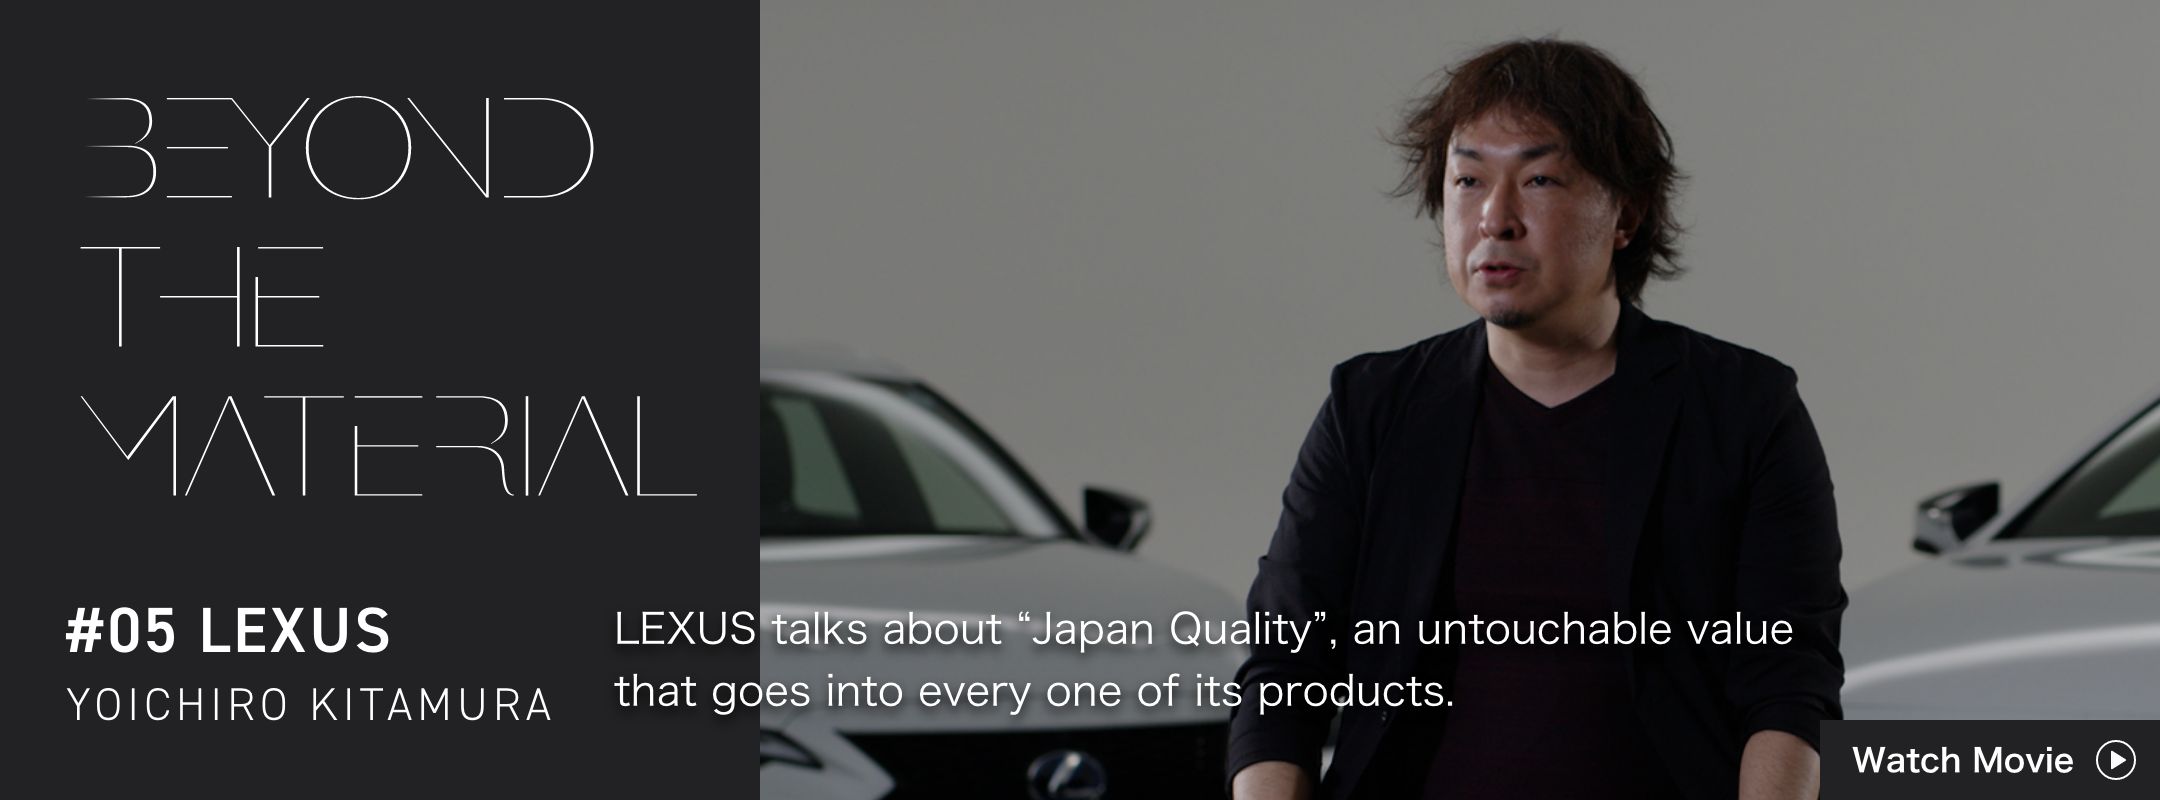 BEYOND THE MATERIAL #05 LEXUS YOICHIRO KITAMURA LEXUS talks about "Japan Quality", an untouchable value that goes into every one of its products.